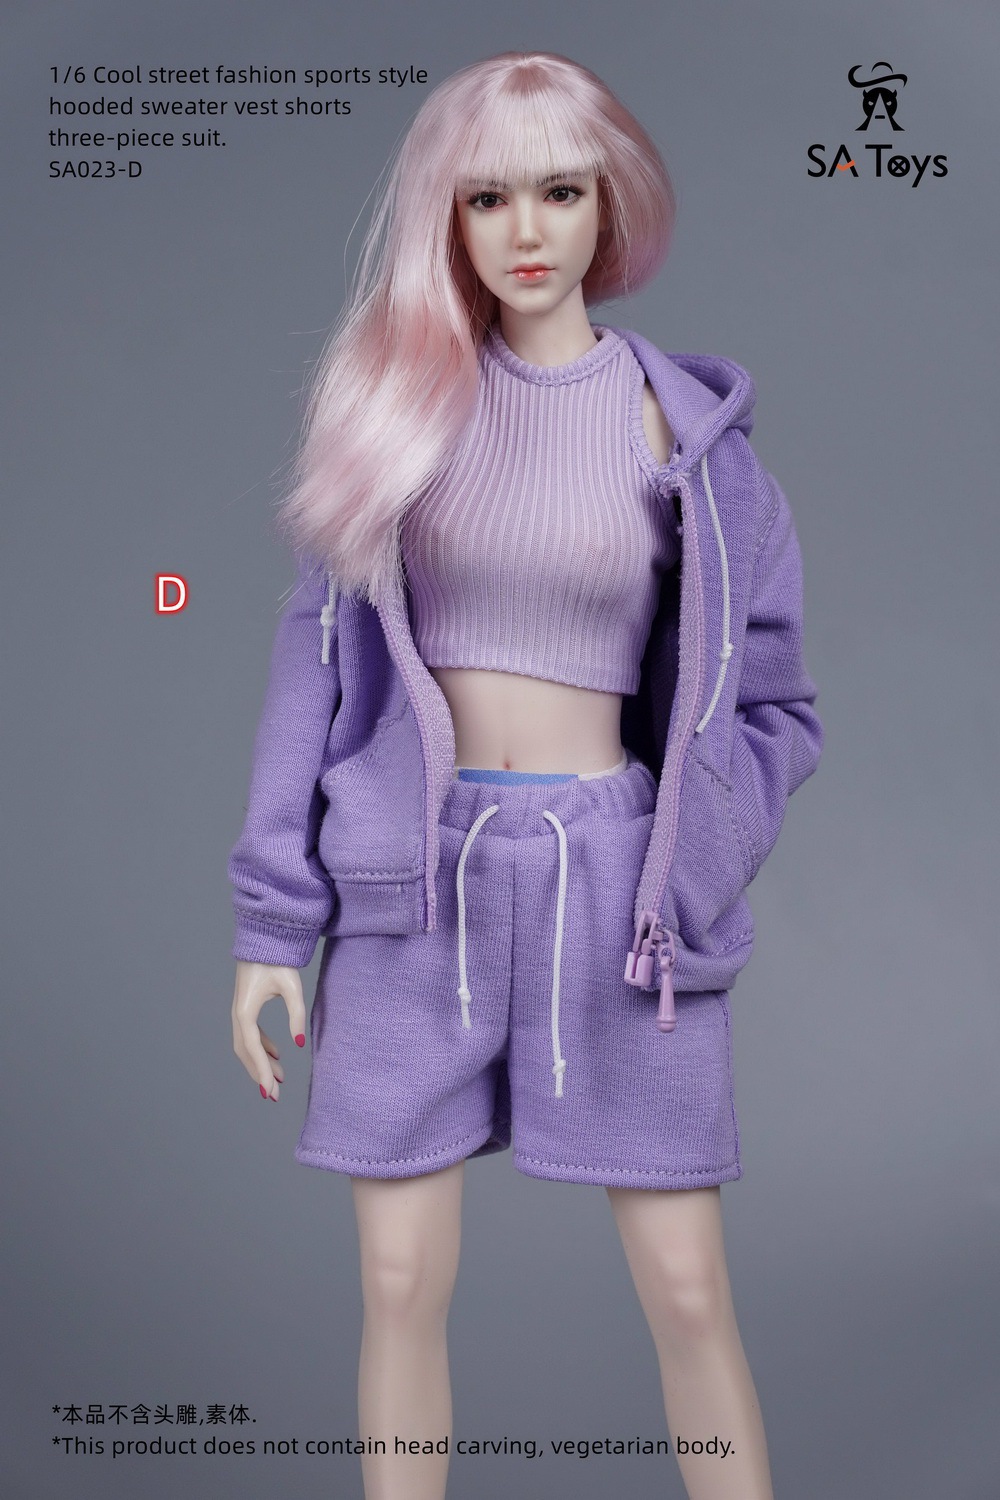 SAToys - NEW PRODUCT: SA Toys: 1/6 hip skirt / floral elastic skirt / fashionable sports style hooded sweater cover, hip-hop fisherman hat halter and footwear casual pants [variety optional] 17020310